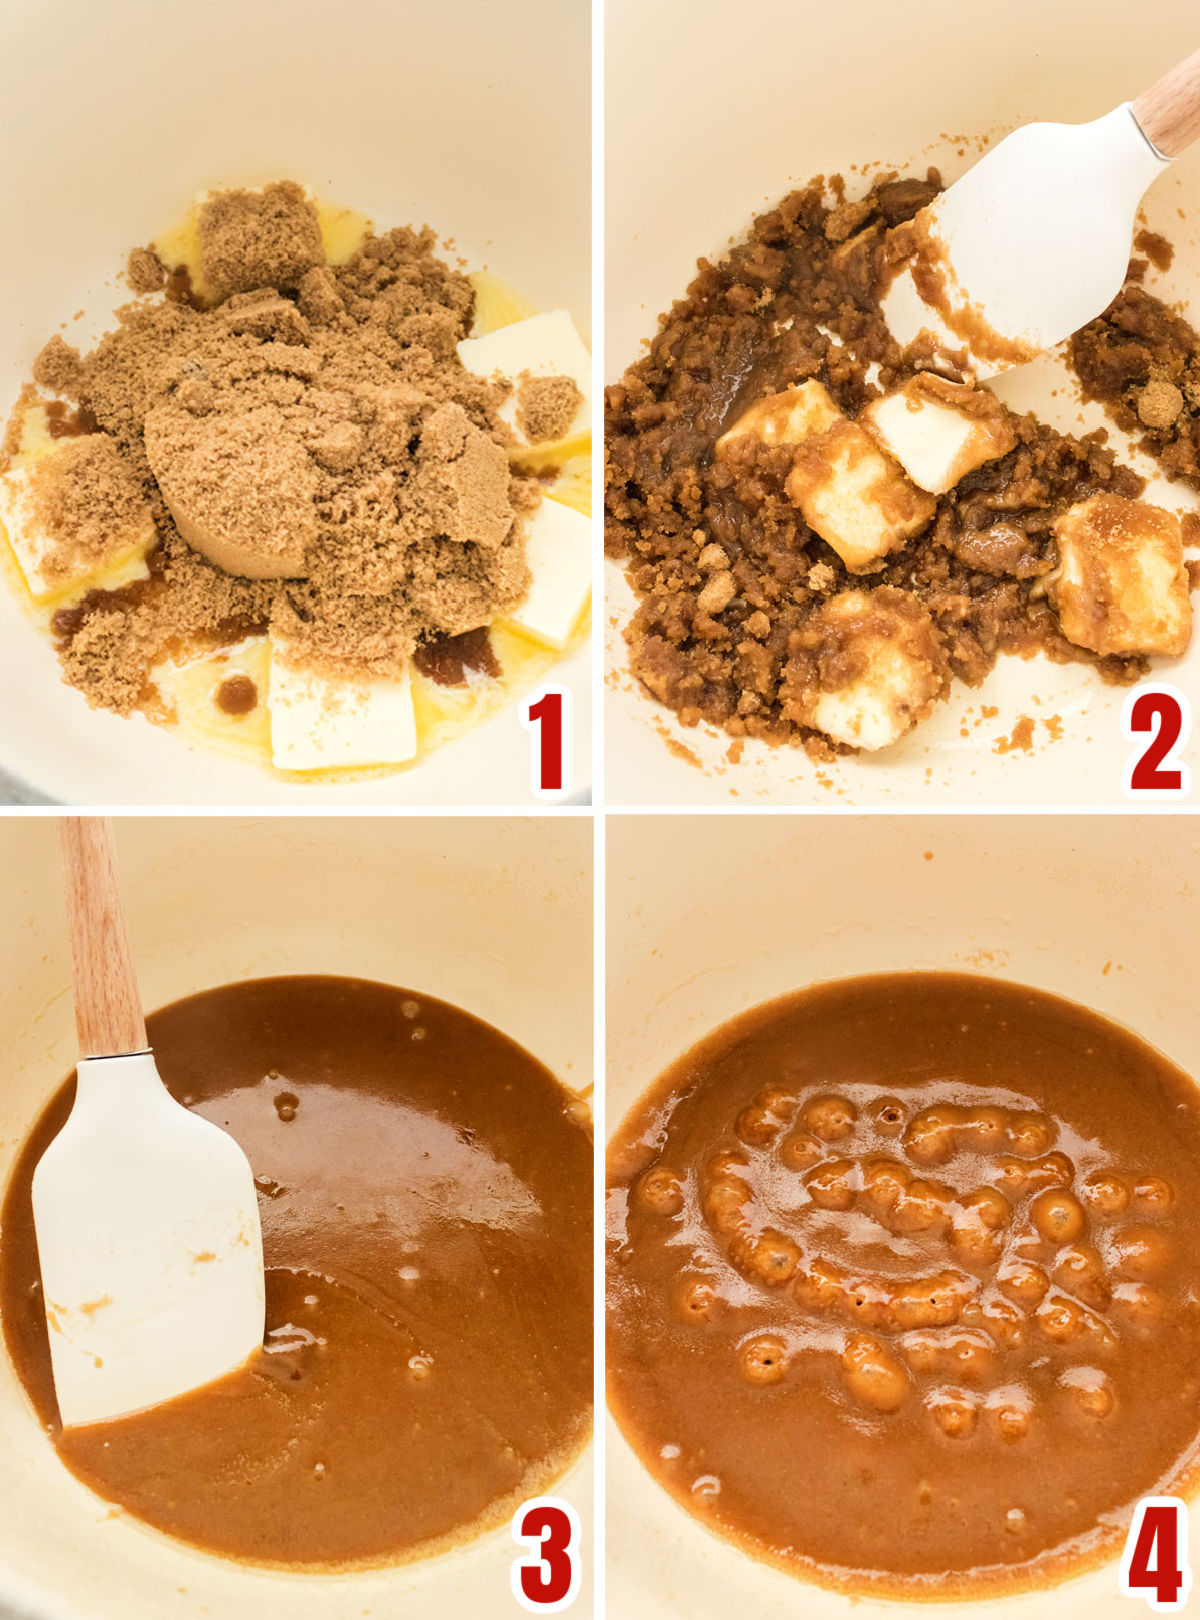 Collage image showing how to make the Caramel sauce.